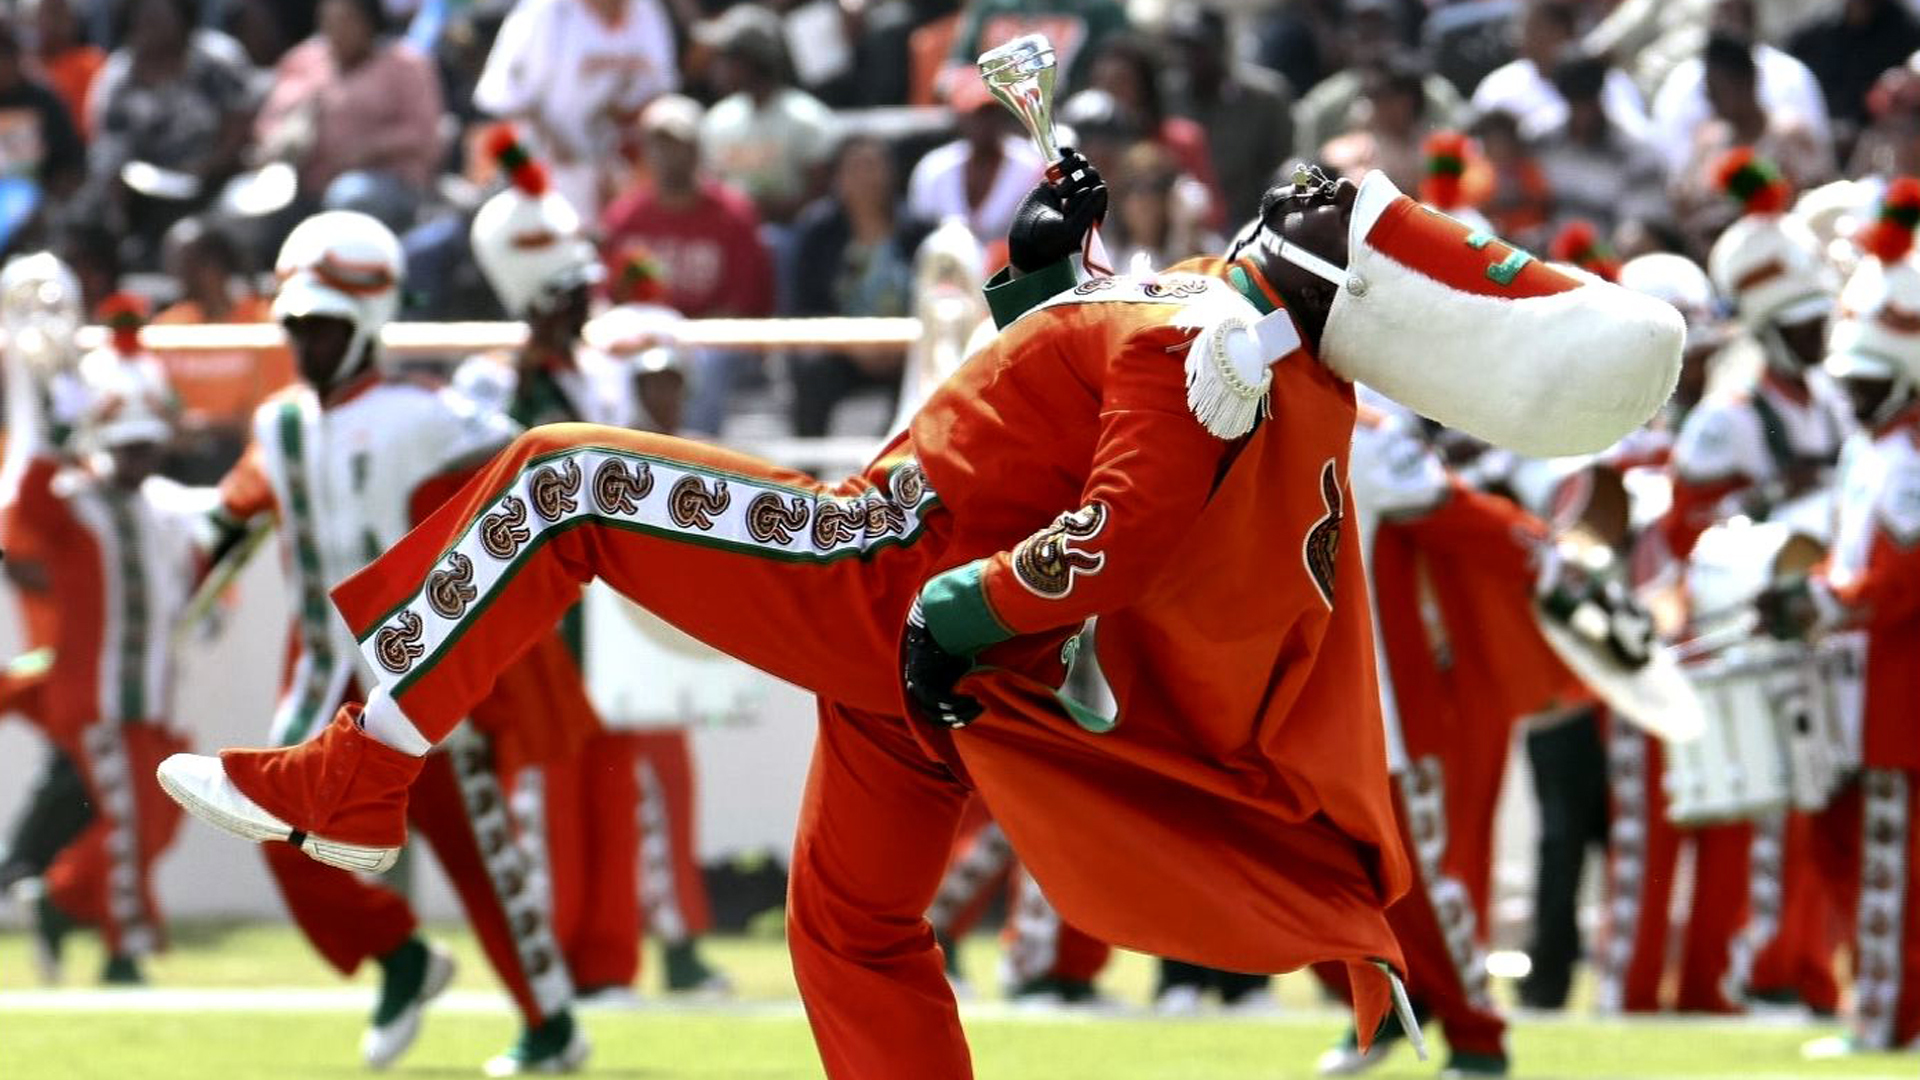 FAMU lifts suspension of Marching 100 band in aftermath of hazing scandal  - CBS News